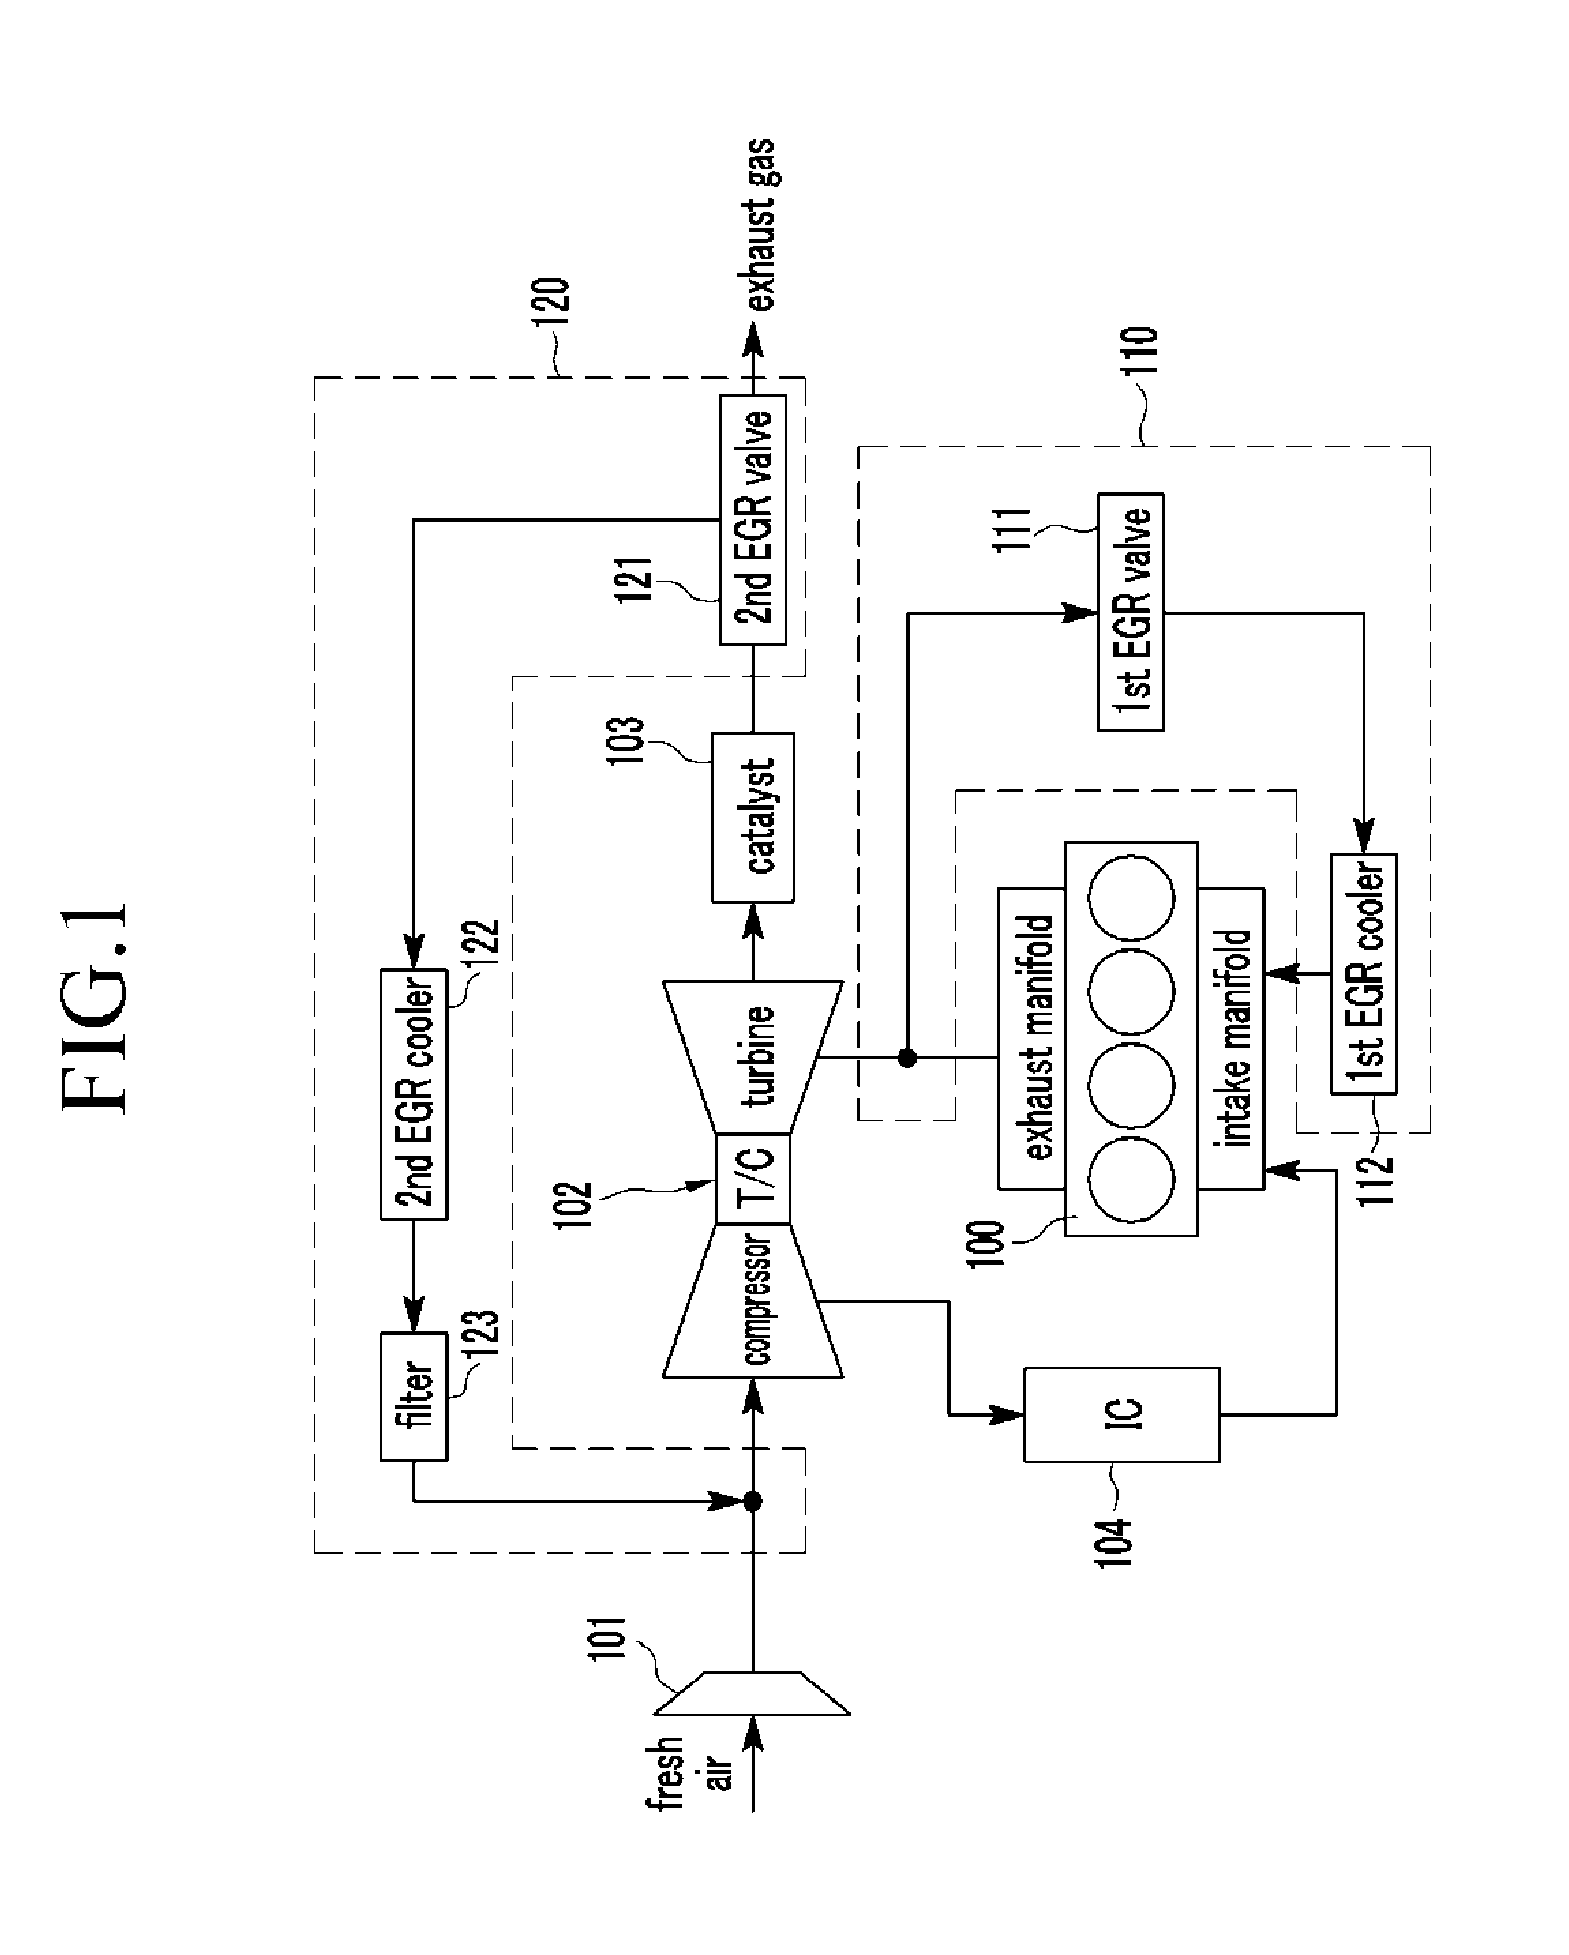 Apparatus and method for controlling low pressure exhaust gas recirculation system